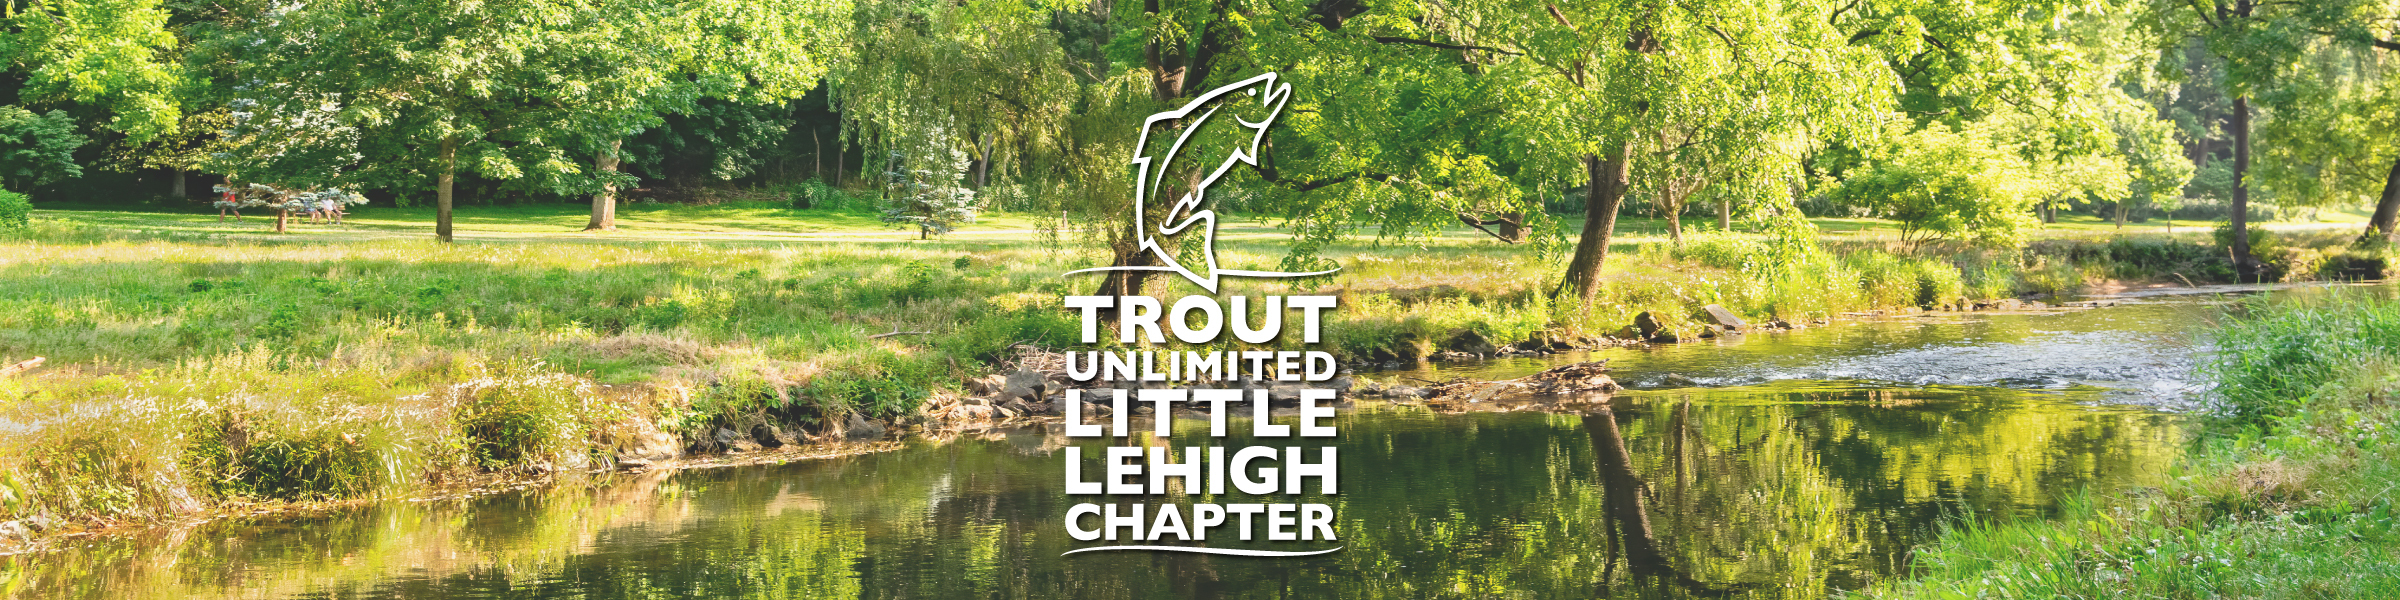 Little Lehigh Trout Unlimited - News & Events